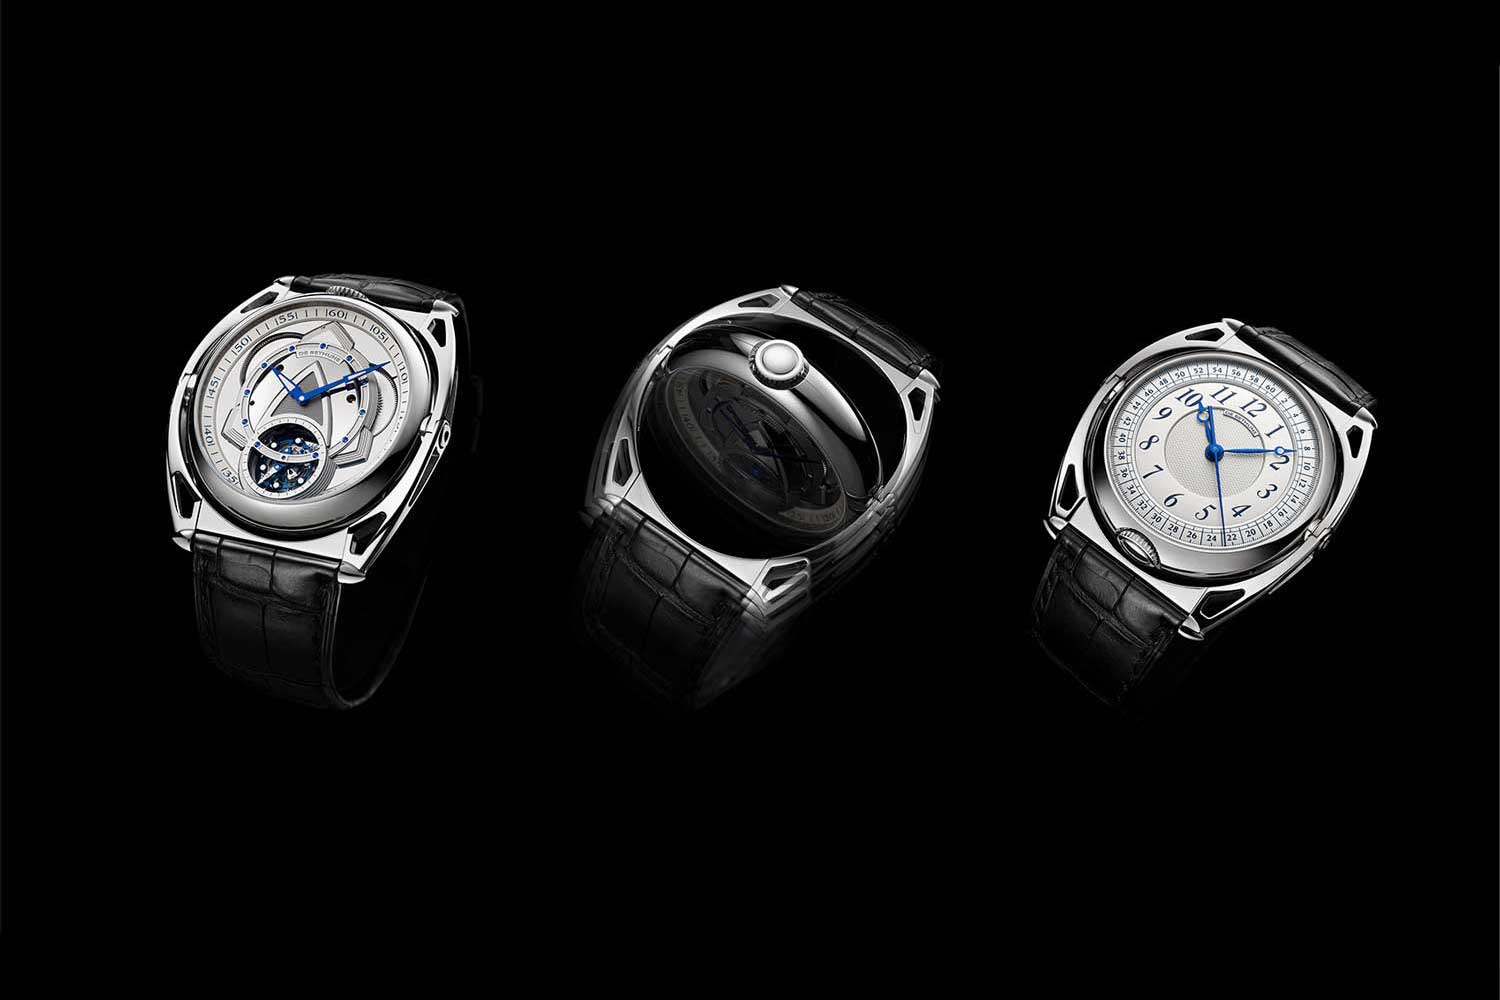 De Bethune introduced the two-sided De Bethune DB Kind of Two Tourbillon earlier this year. The watch transforms between its two faces along an axis on the articulating lugs of the timepiece.